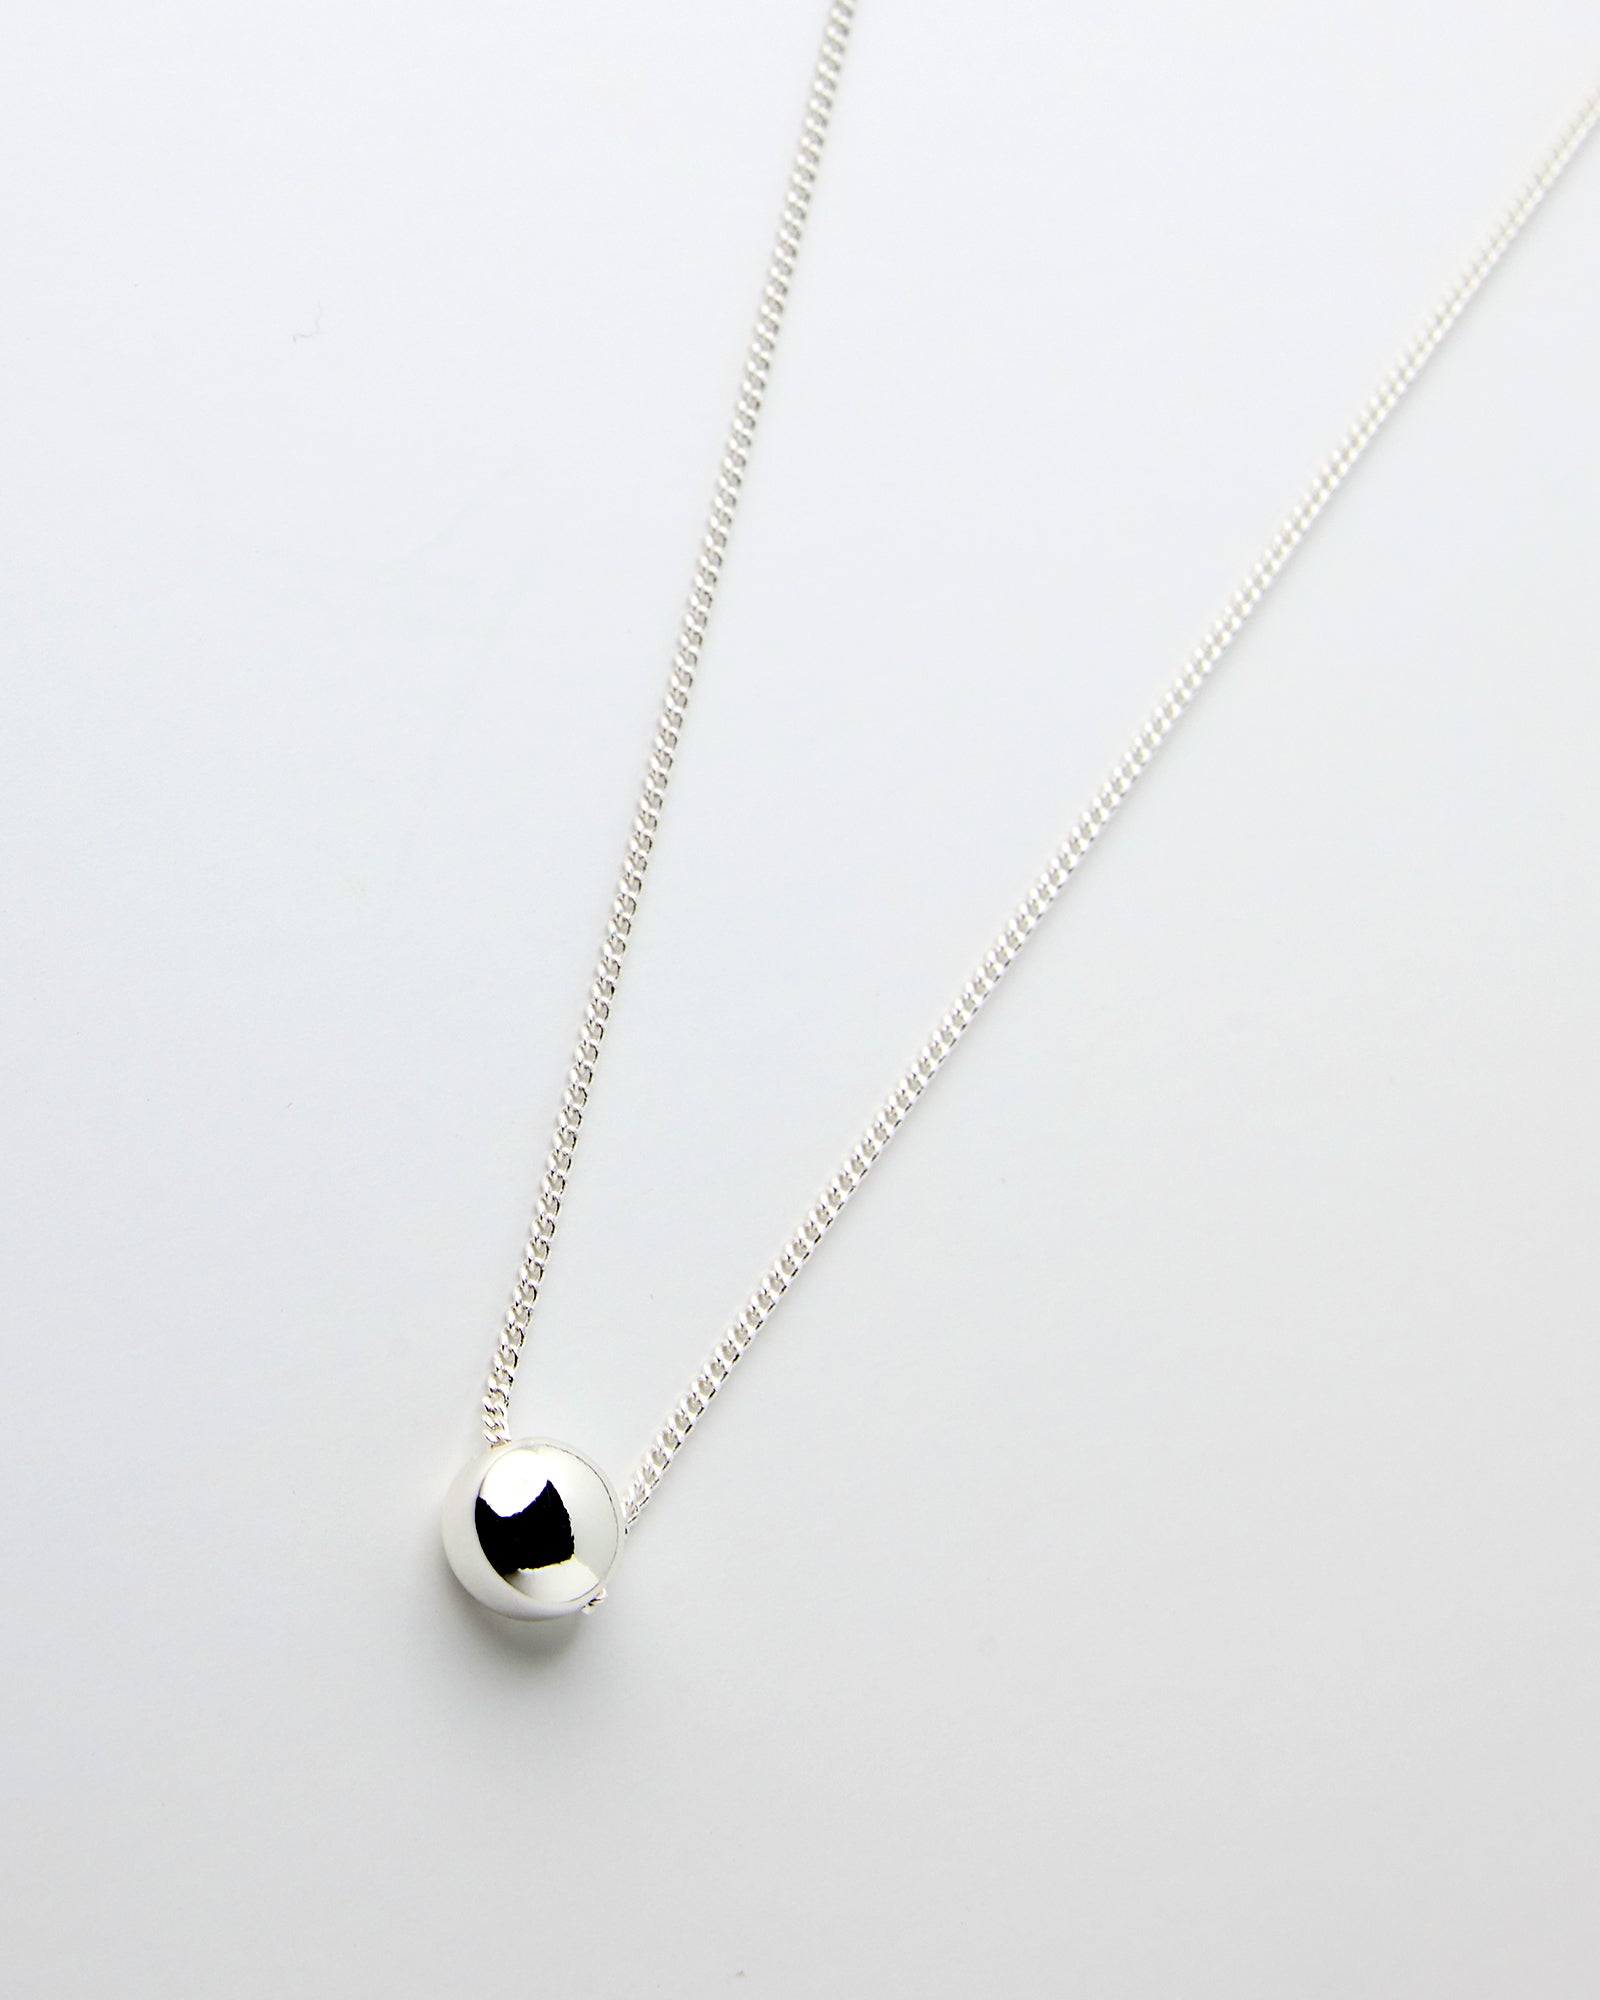 Silver chain necklace with silver bead in middle